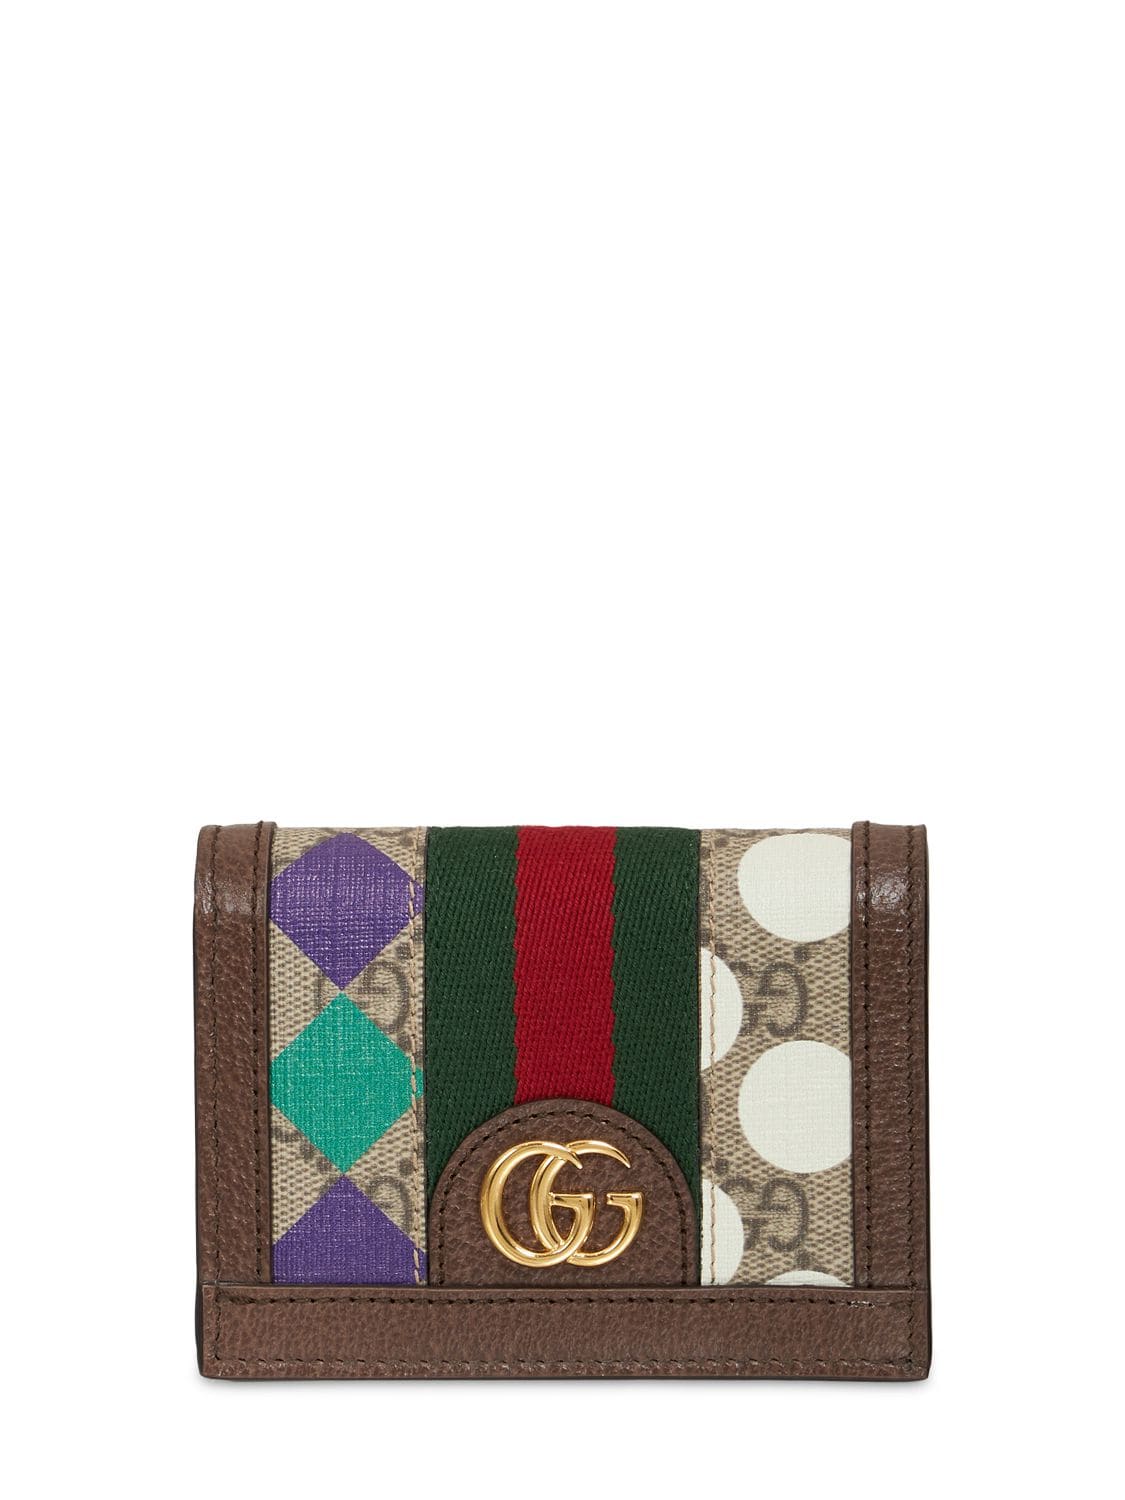 GUCCI OPHIDIA GG SUPREME COMPACT WALLET,75IXHU108-OTG4NQ2